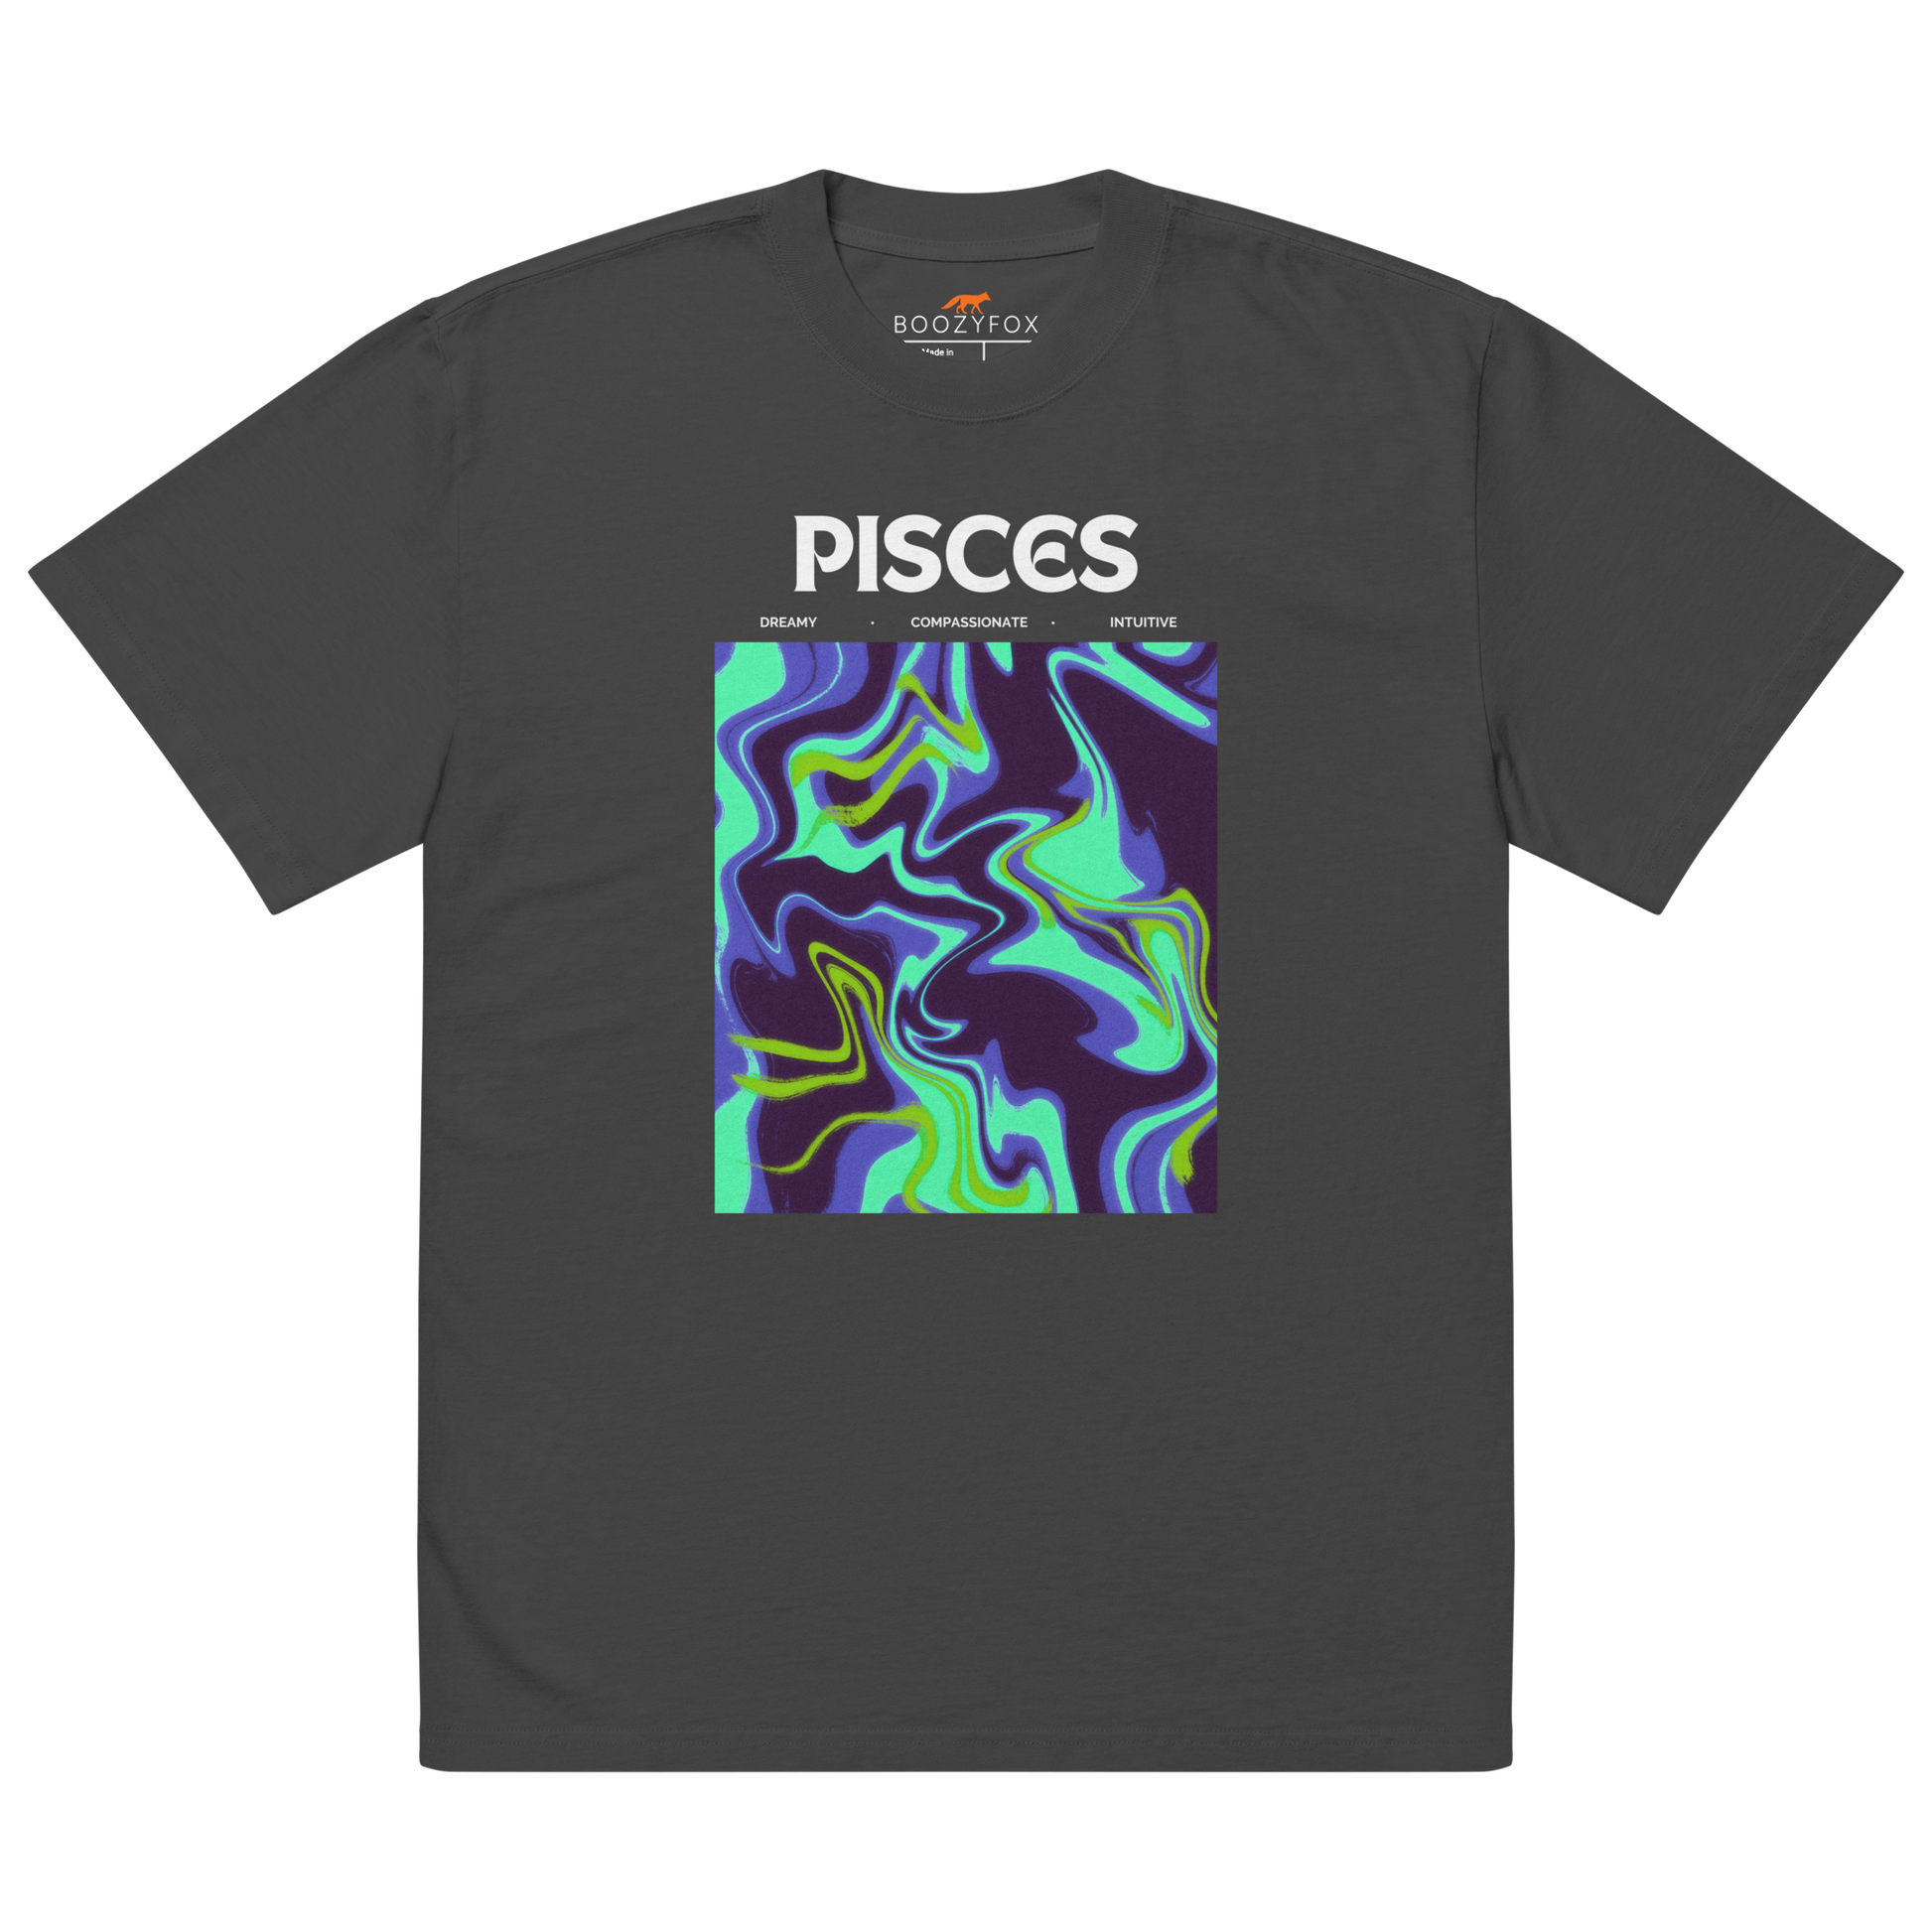 Faded Black Pisces Oversized T-Shirt featuring an Abstract Pisces Star Sign graphic on the chest - Cool Graphic Zodiac Oversized Tees - Boozy Fox